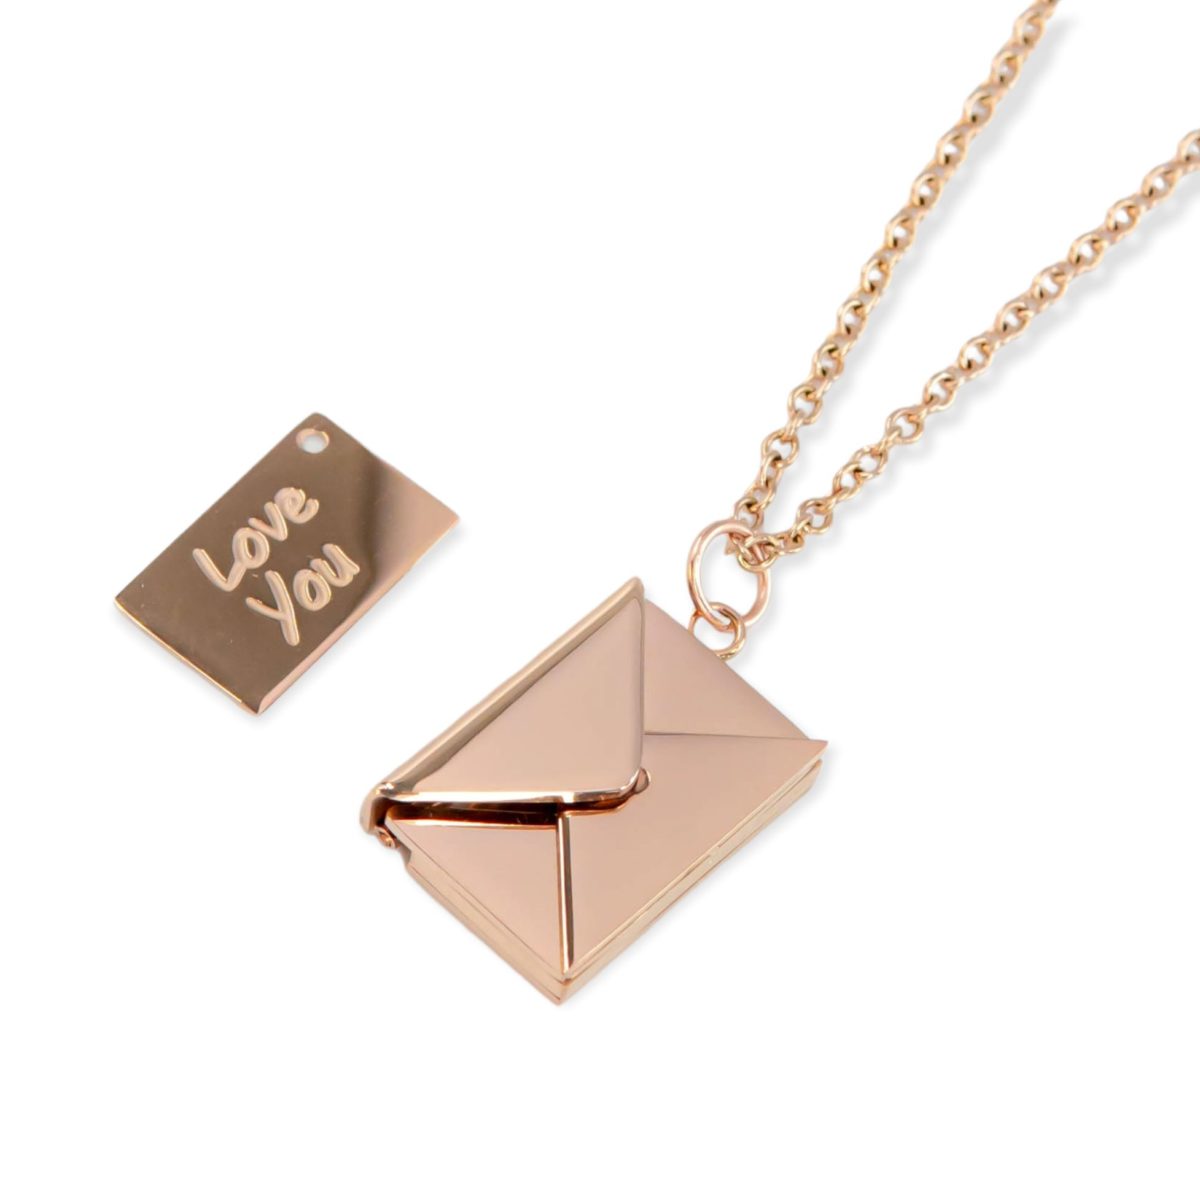 https://m.clubbella.co/product/love-letter-18k-rose-gold-plated-necklace/ Love letter necklace 9